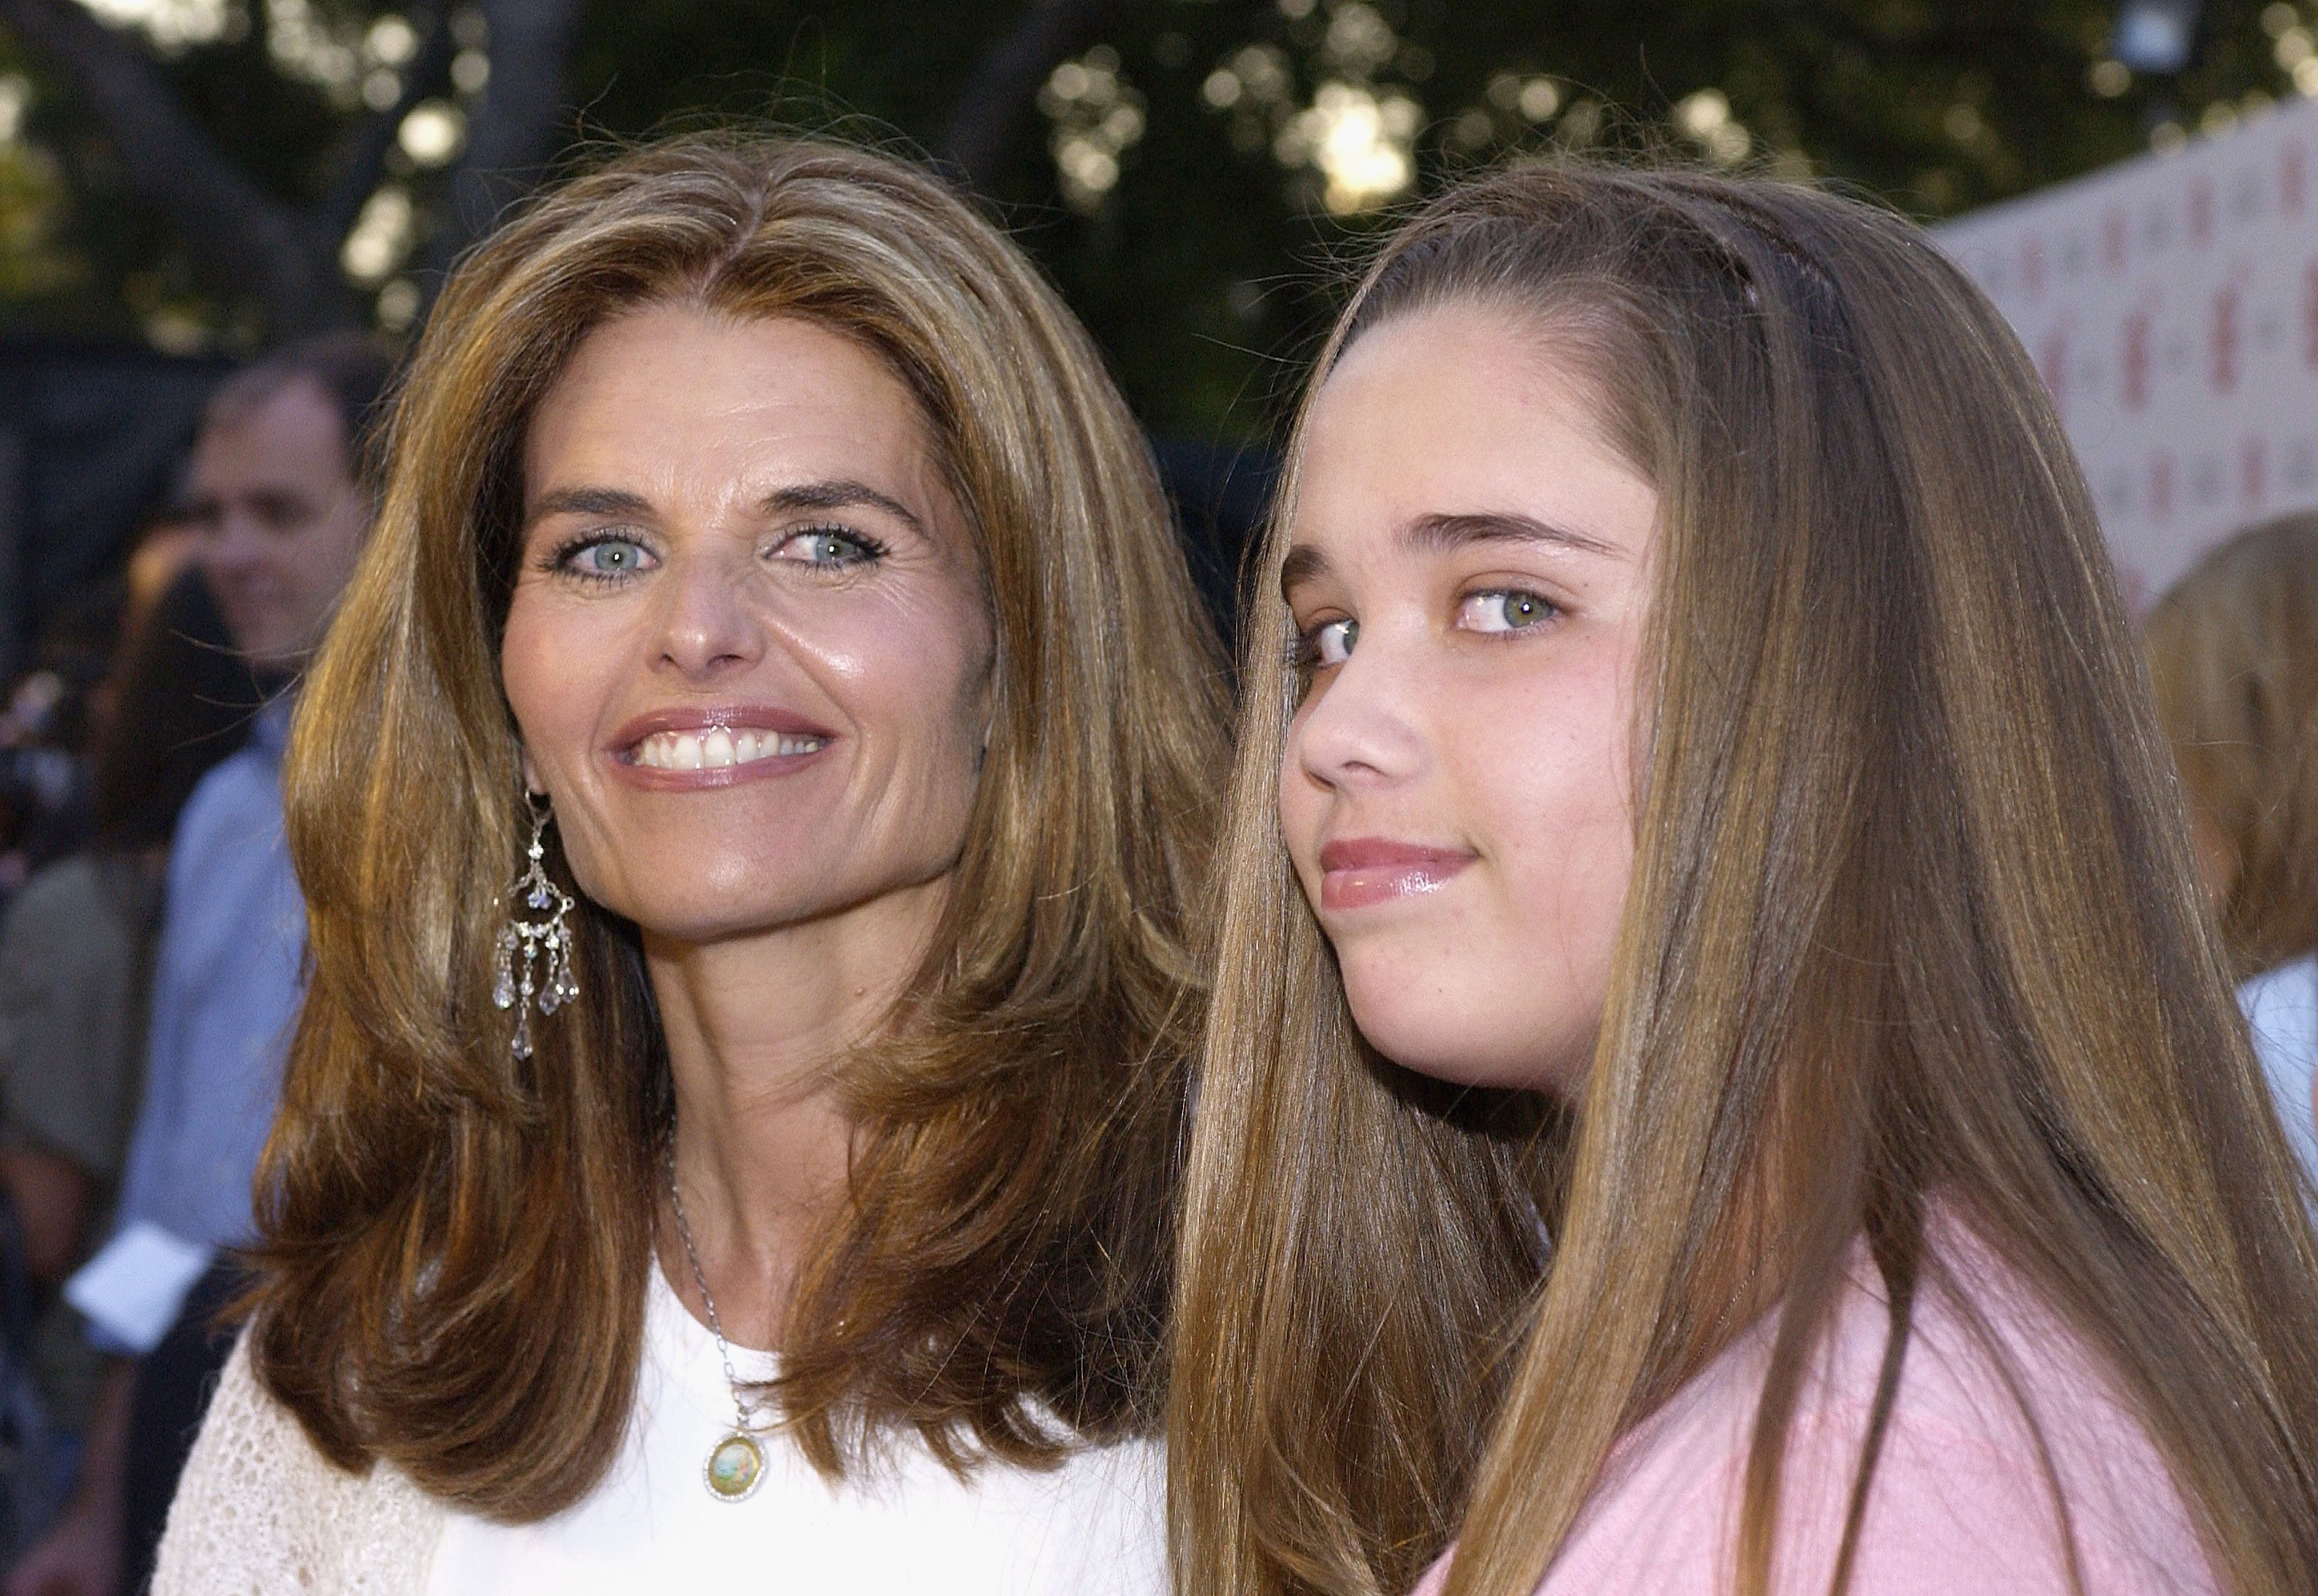 Maria Shriver and Christina Schwarzenegger at the premiere of "The Clearing" on June 26, 2004, in Los Angeles, California. | Source: Getty Images